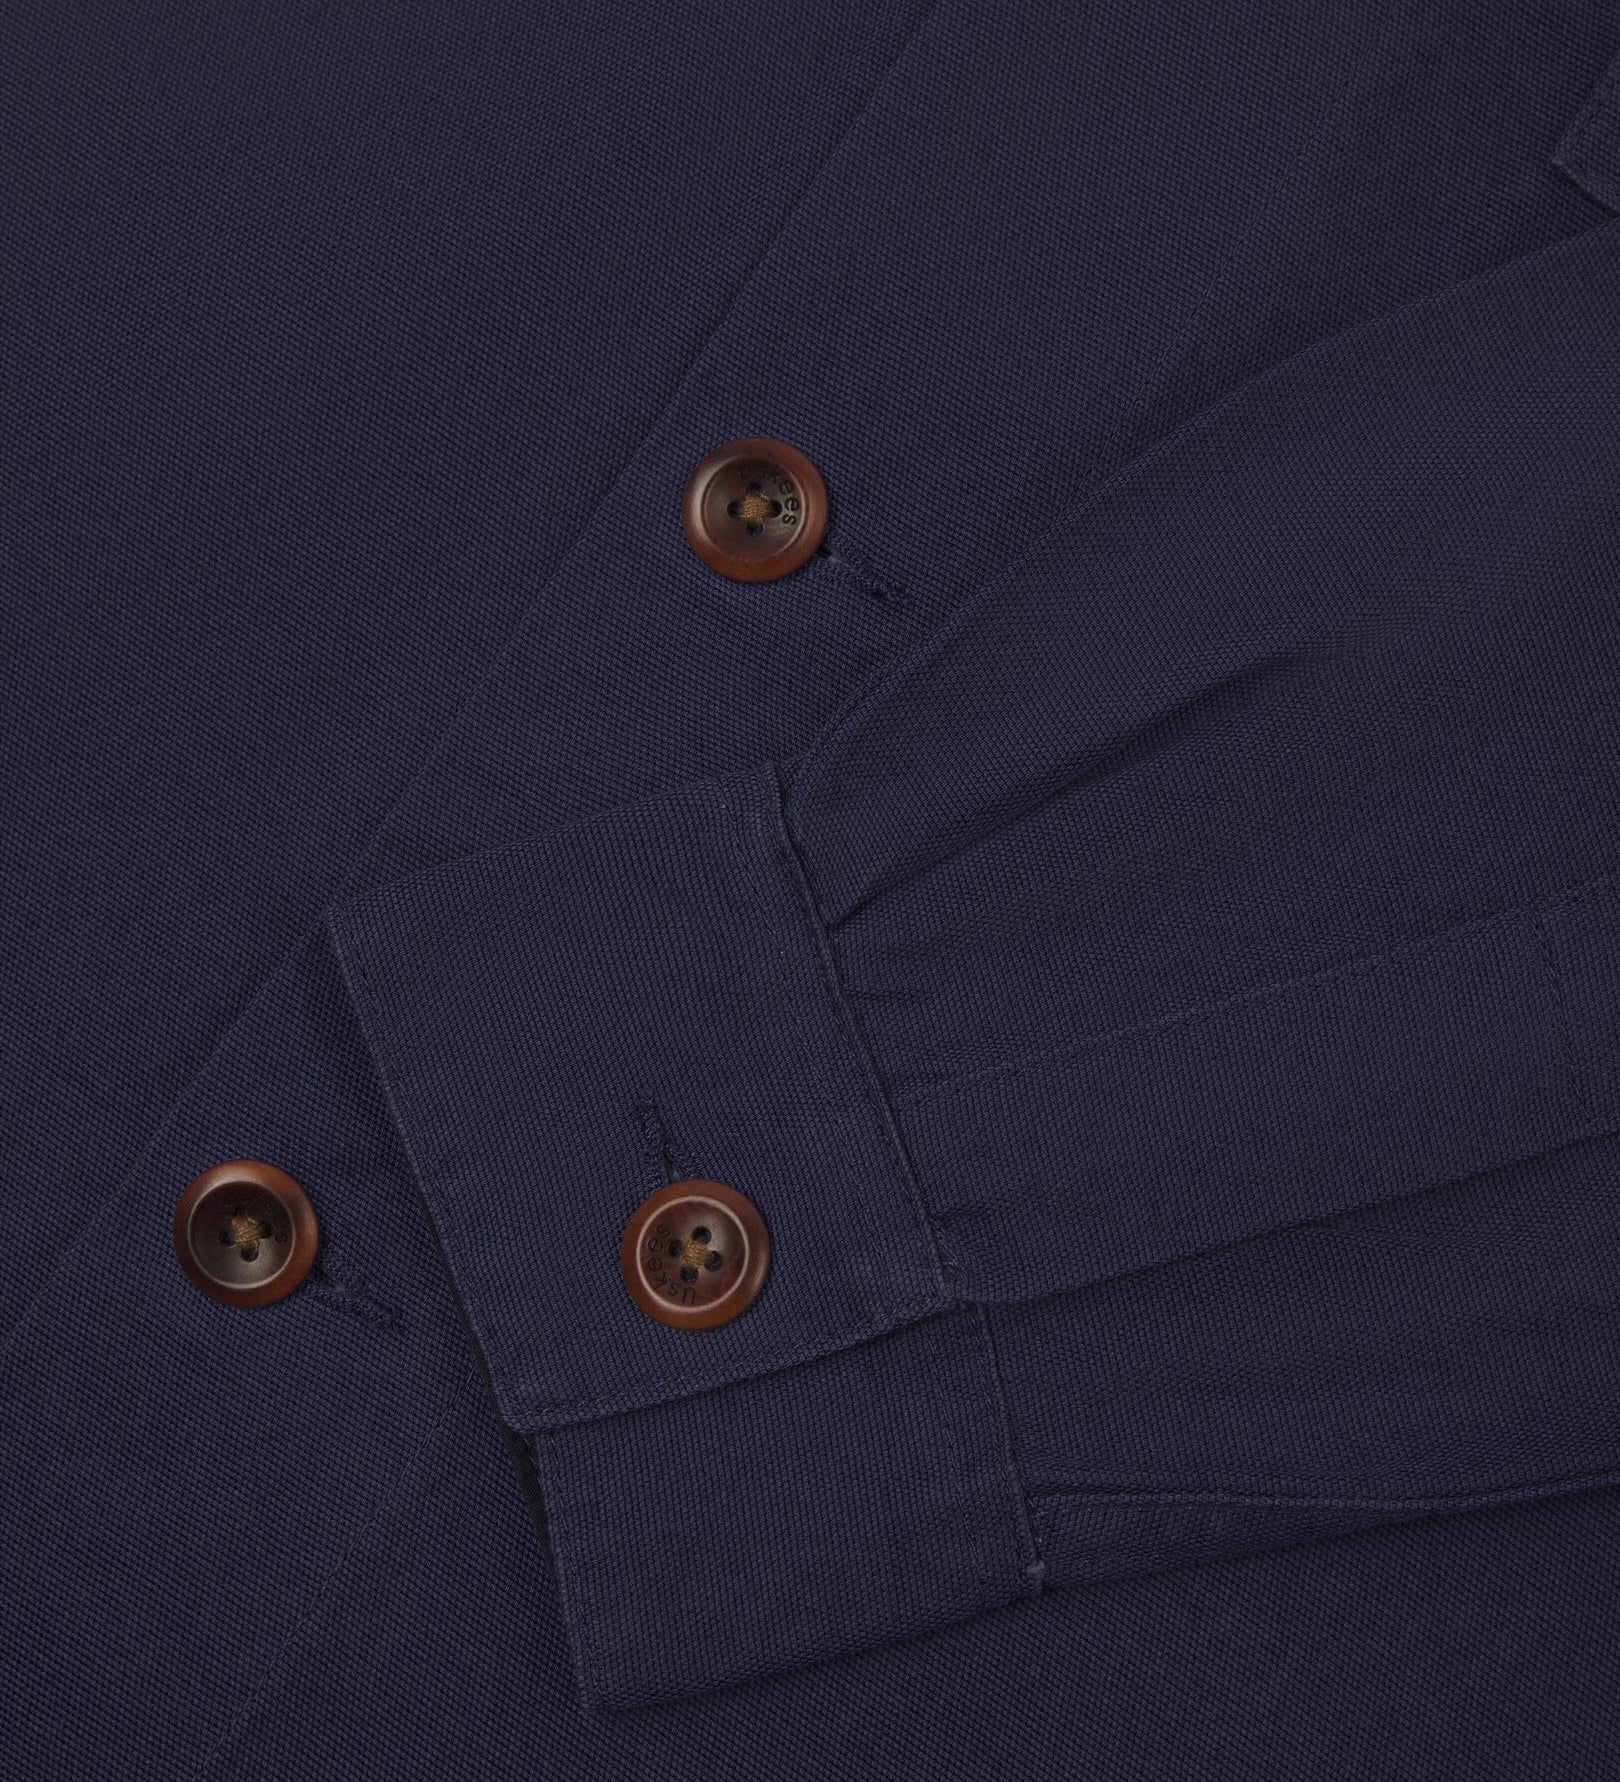 View of the mid-section and sleeve of the 3003 Uskees button-down work shirt in midnight blue with focus on cuff, placket and corozo buttons.